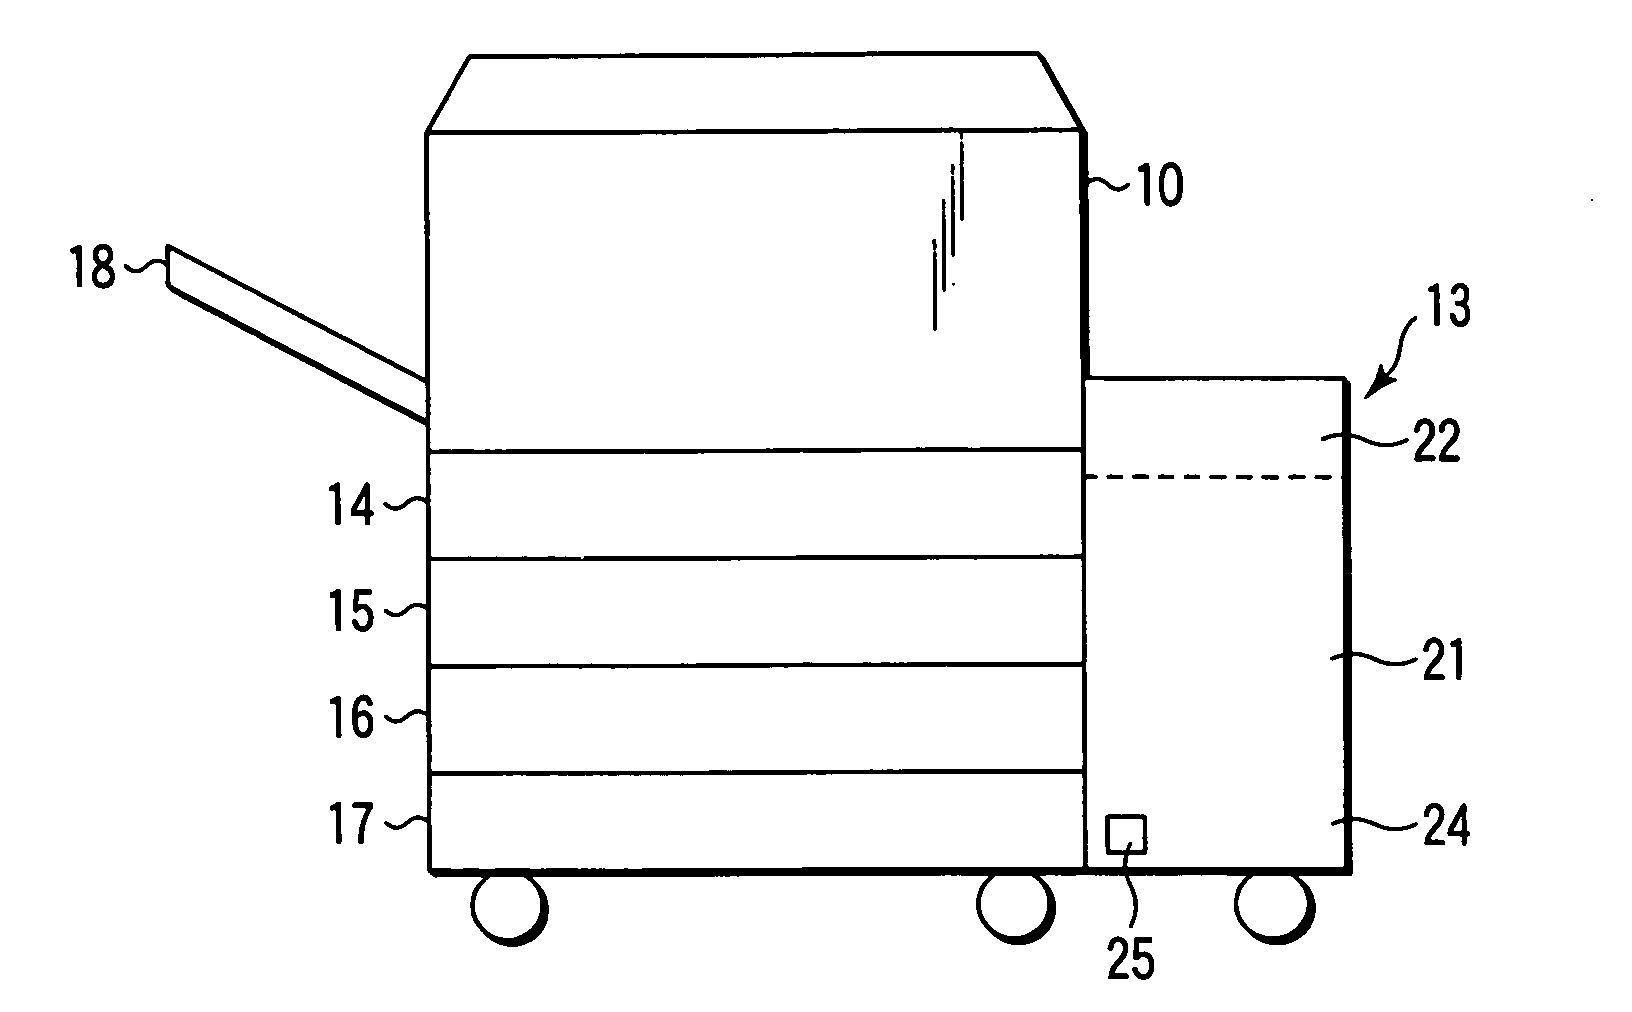 Feed paper apparatus